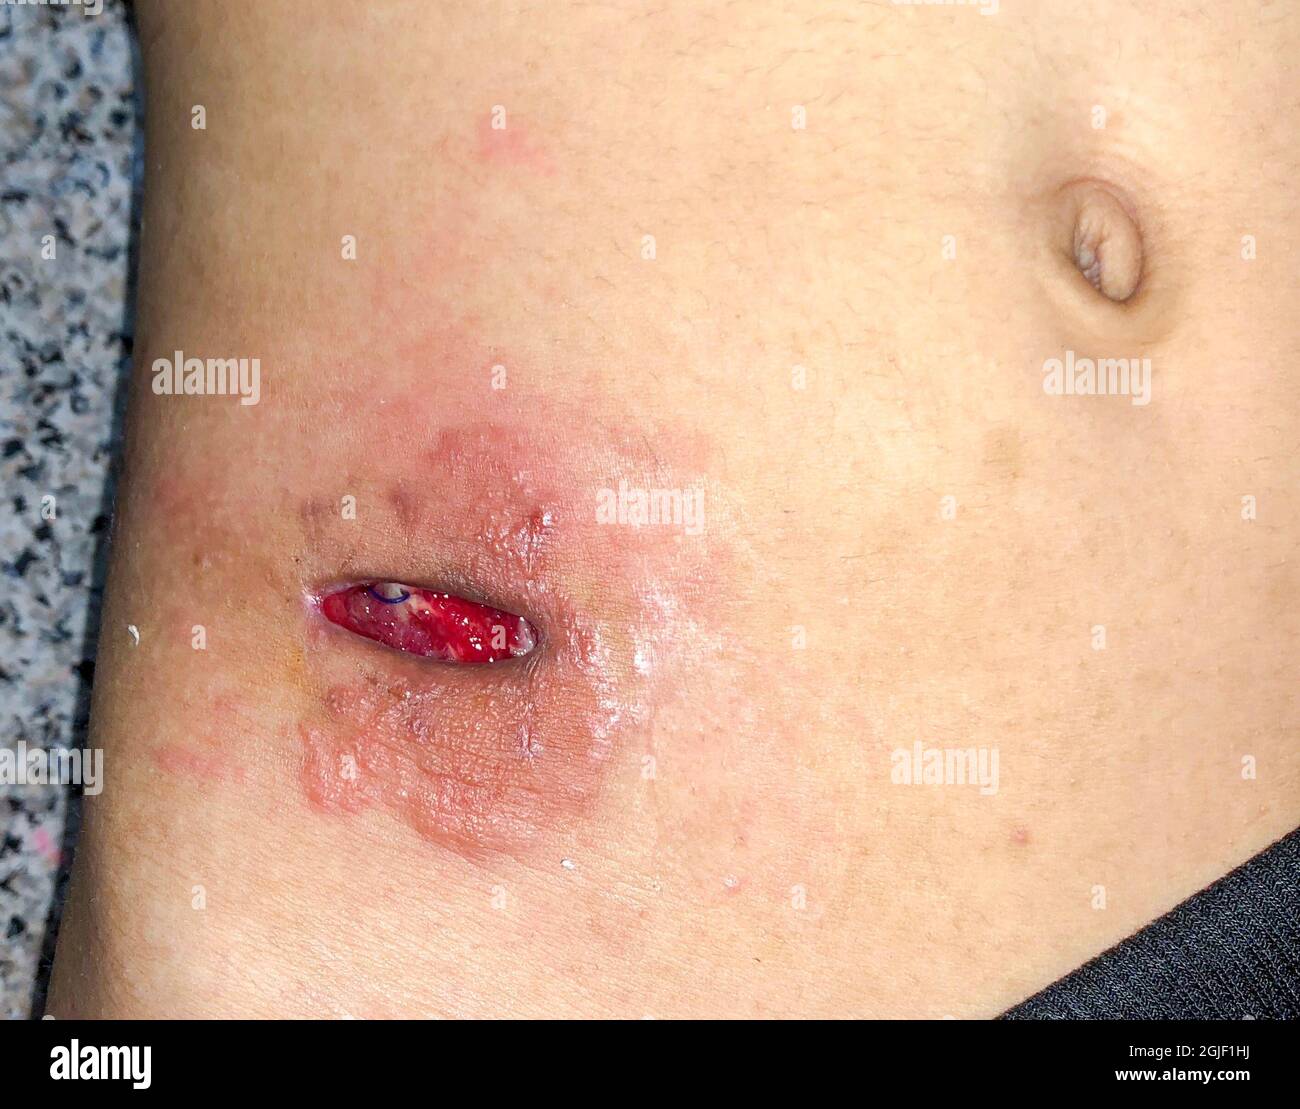 Poor wound healing due to wound gapping. Incision for appendectomy. Top view. Stock Photo